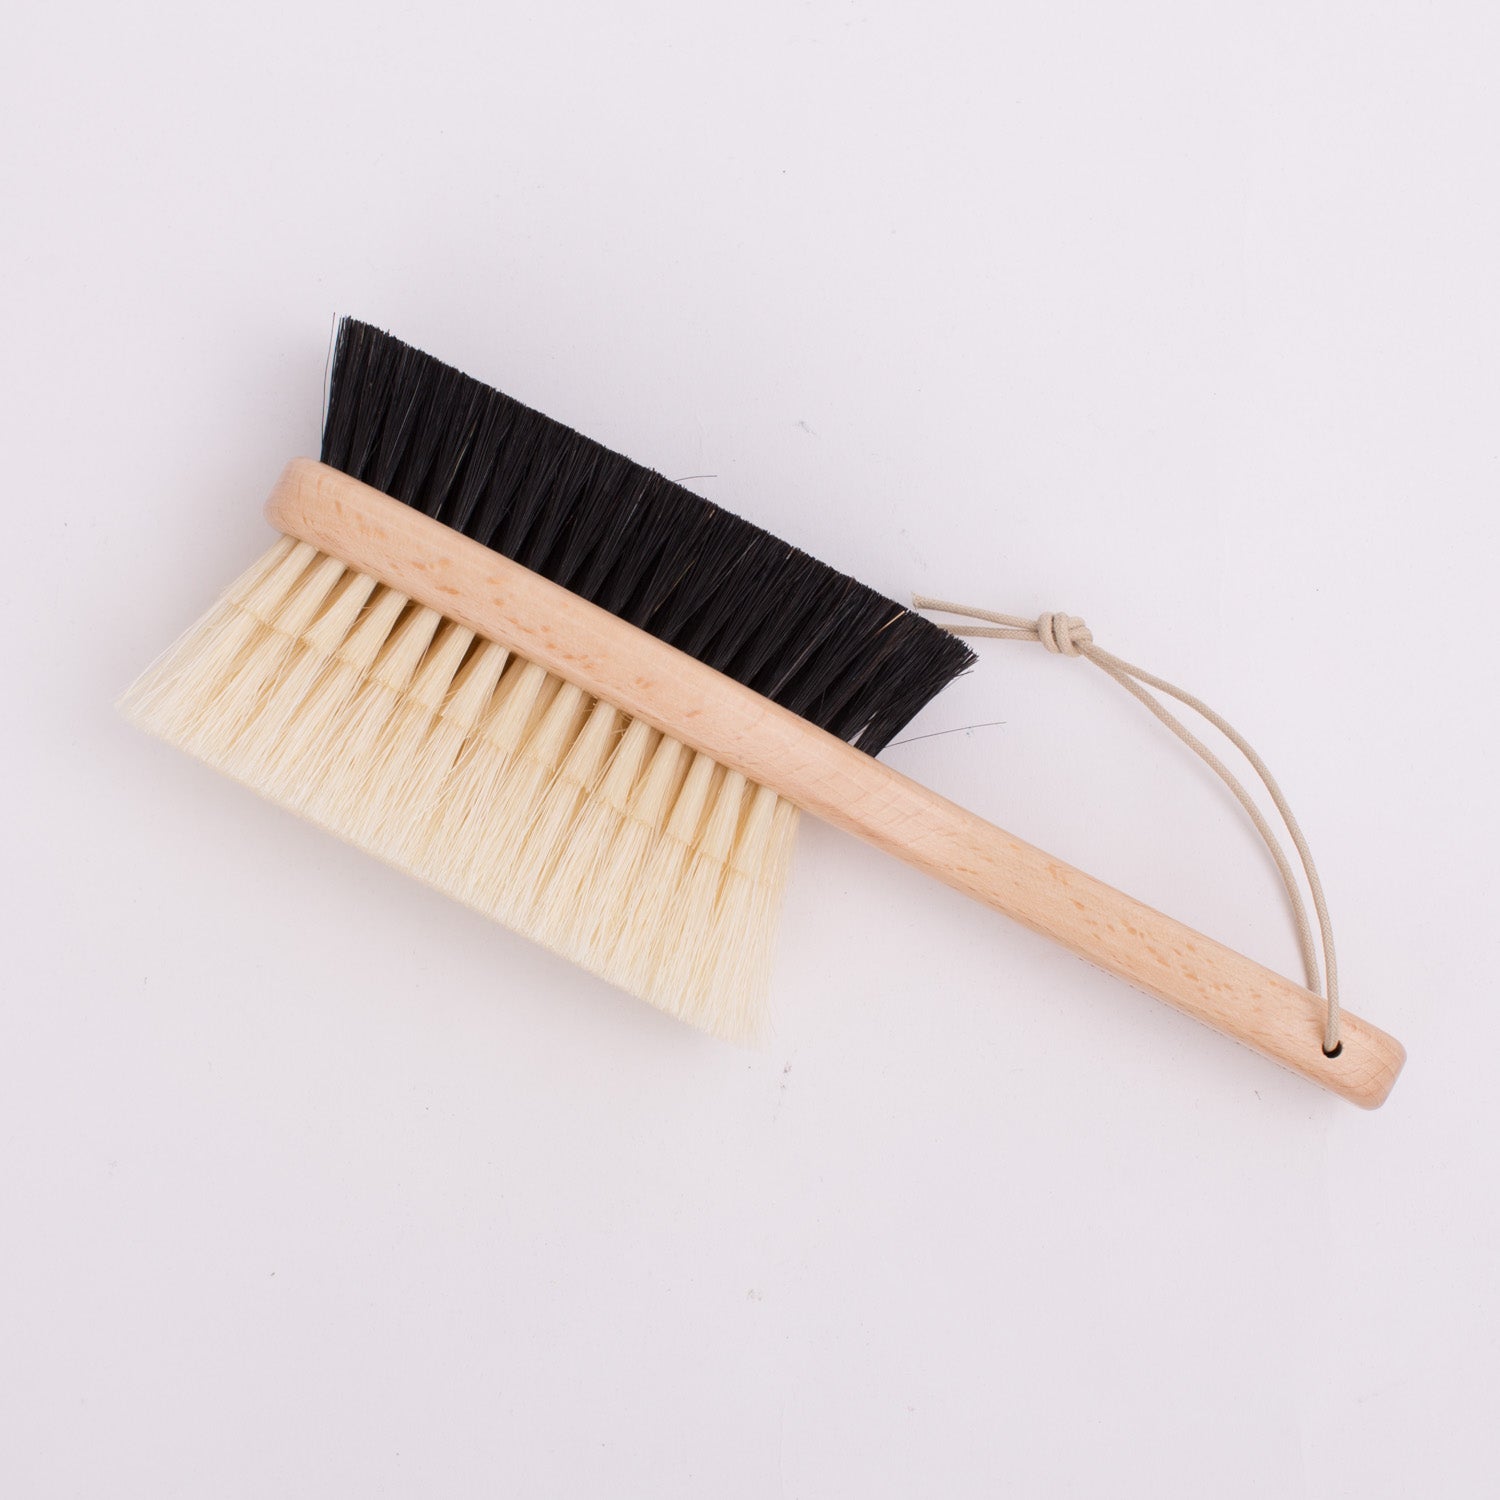 Hanger Project Deluxe Double-Sided Garment Brush